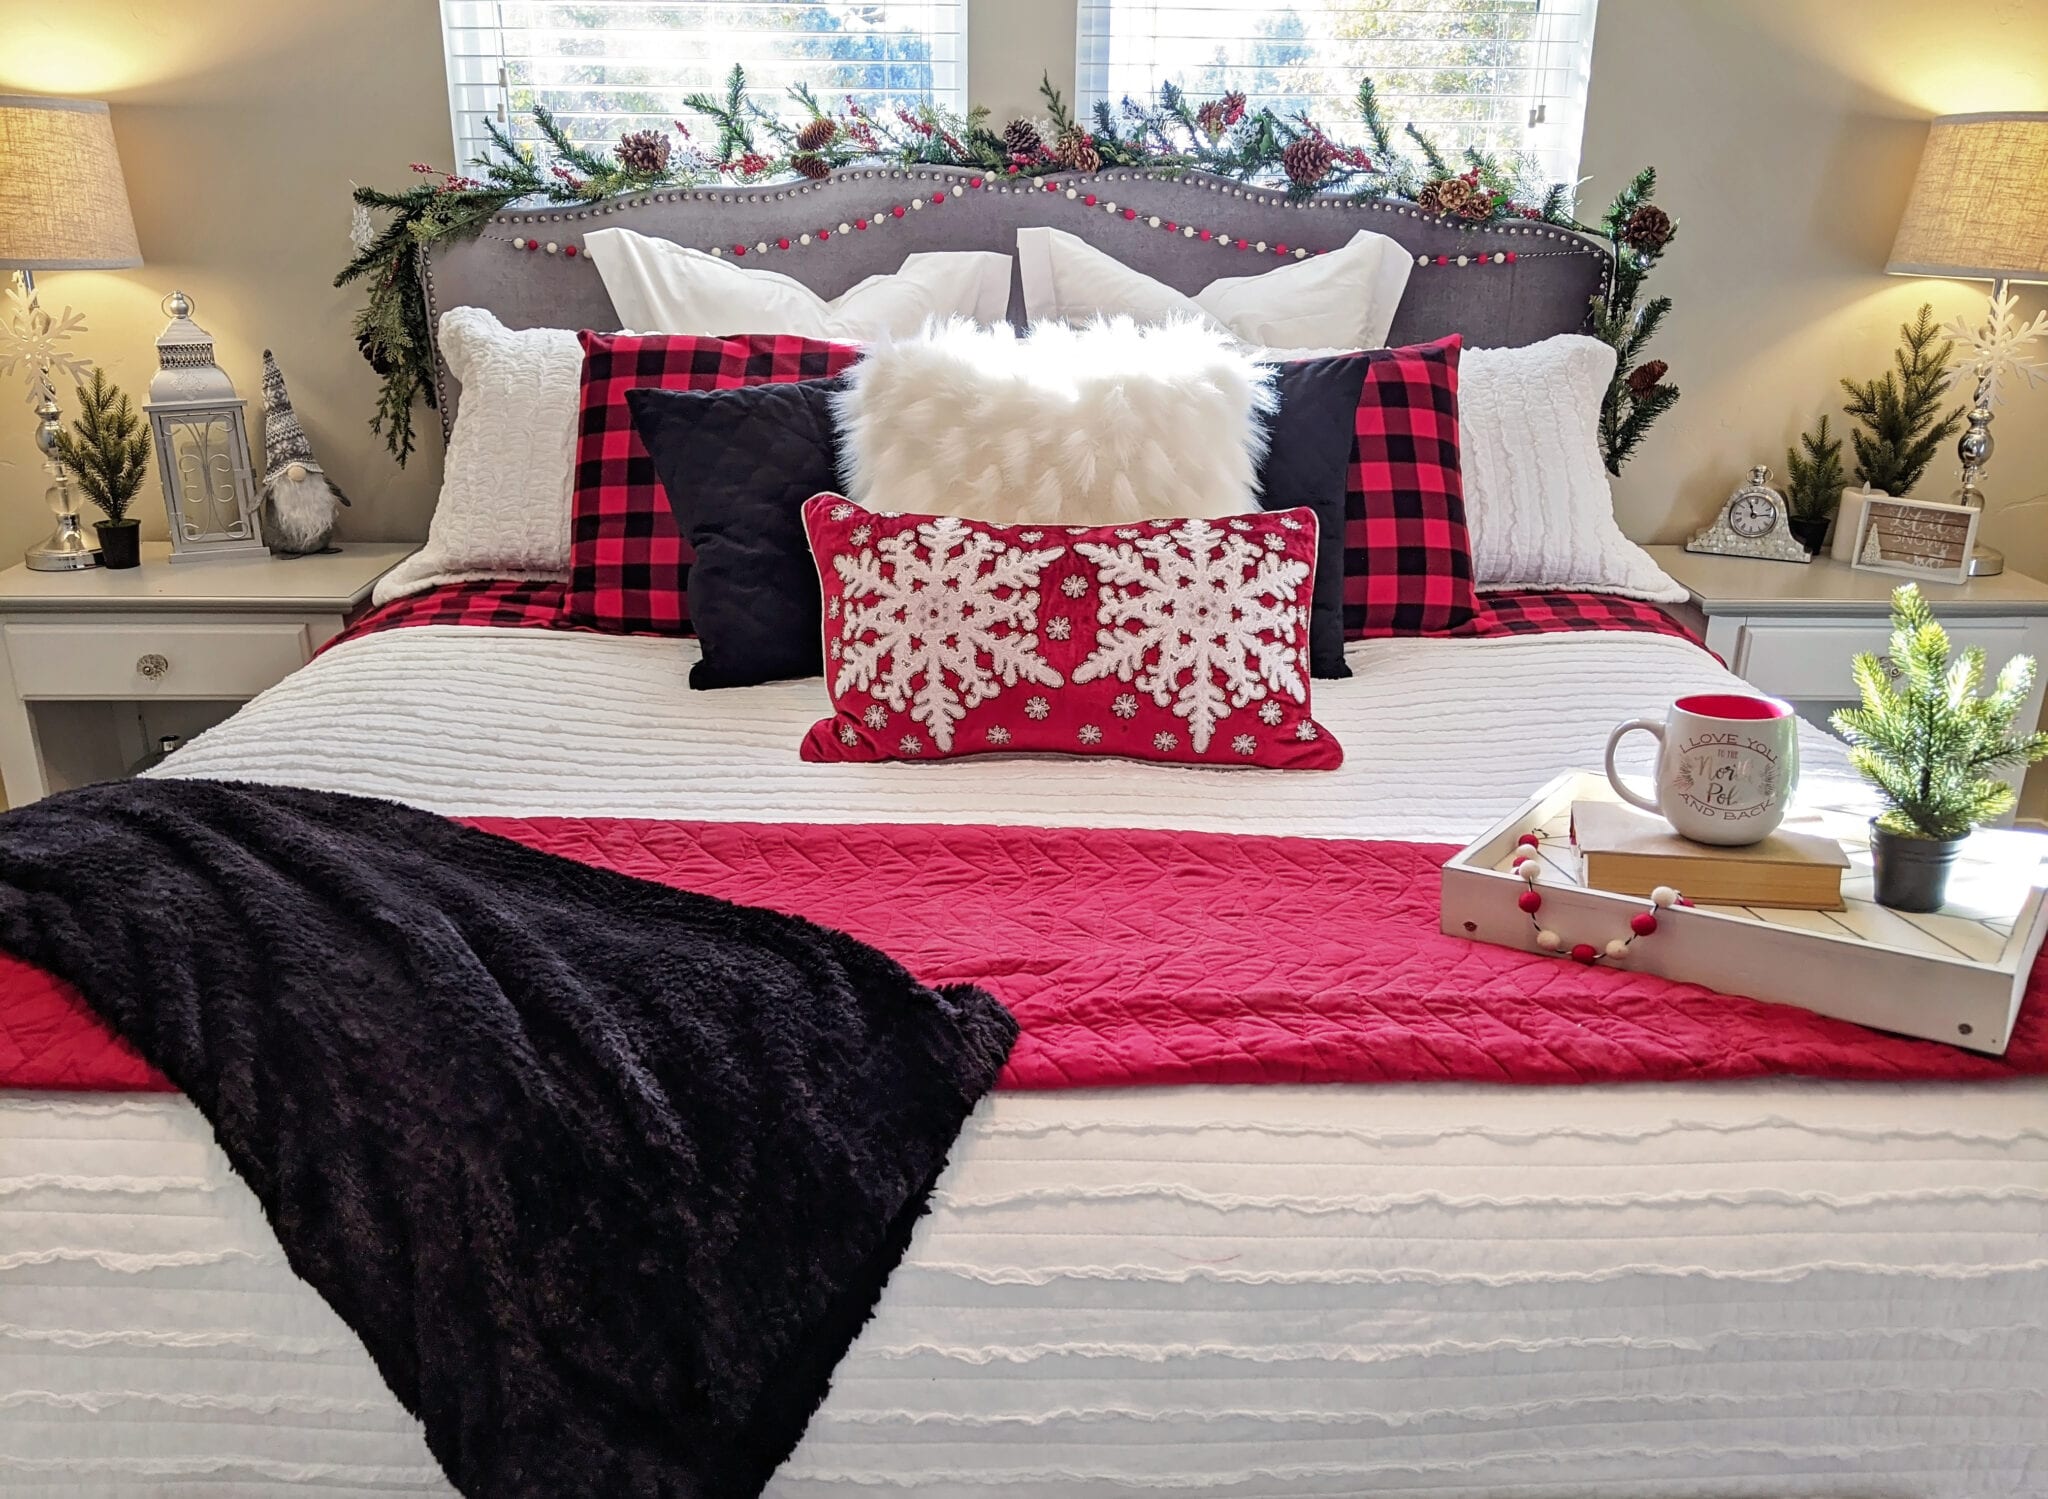 10 Budgetfriendly Tips On How To Decorate Your Bedroom For Christmas